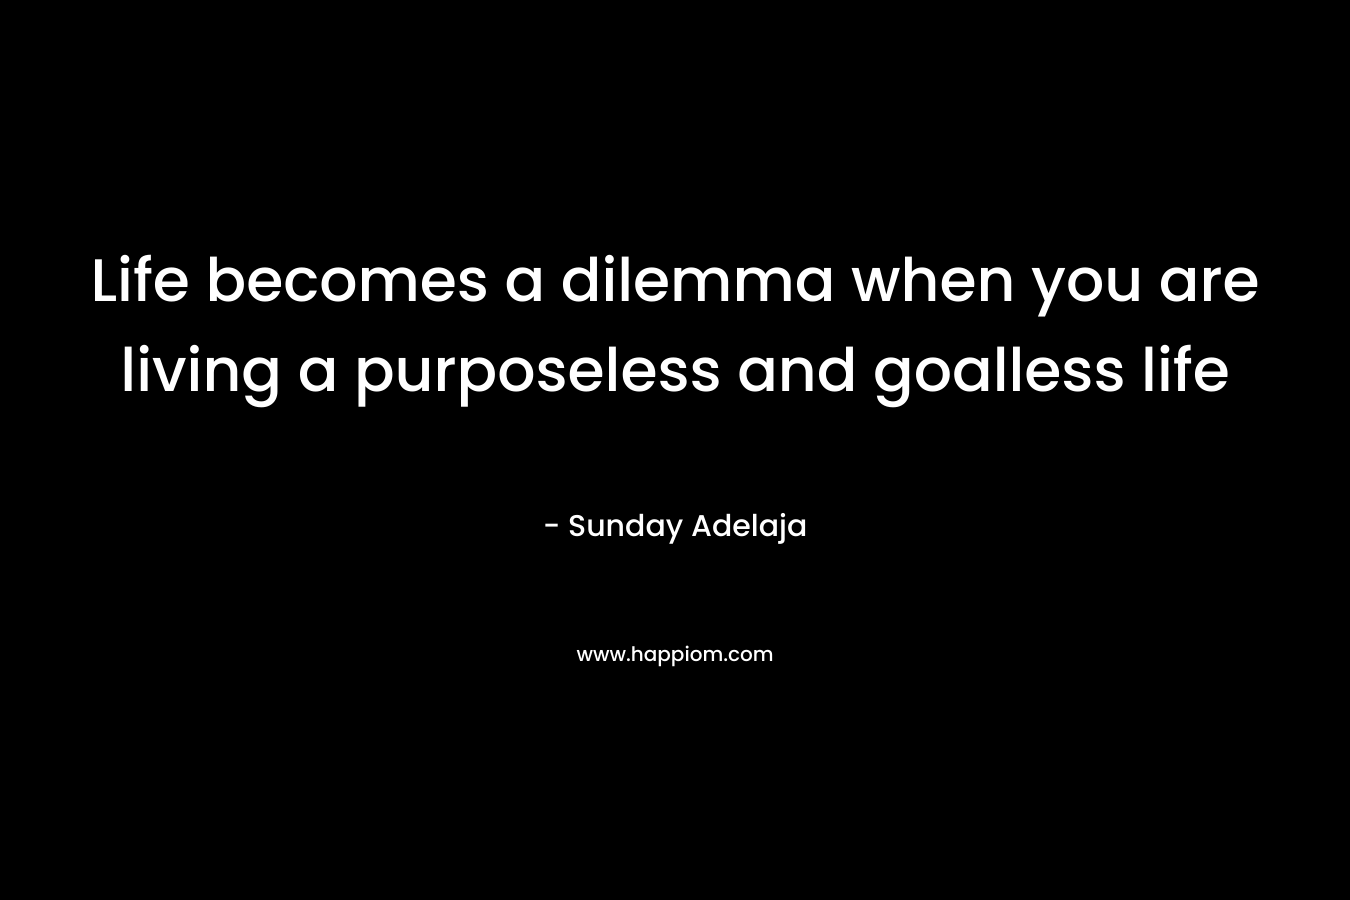 Life becomes a dilemma when you are living a purposeless and goalless life